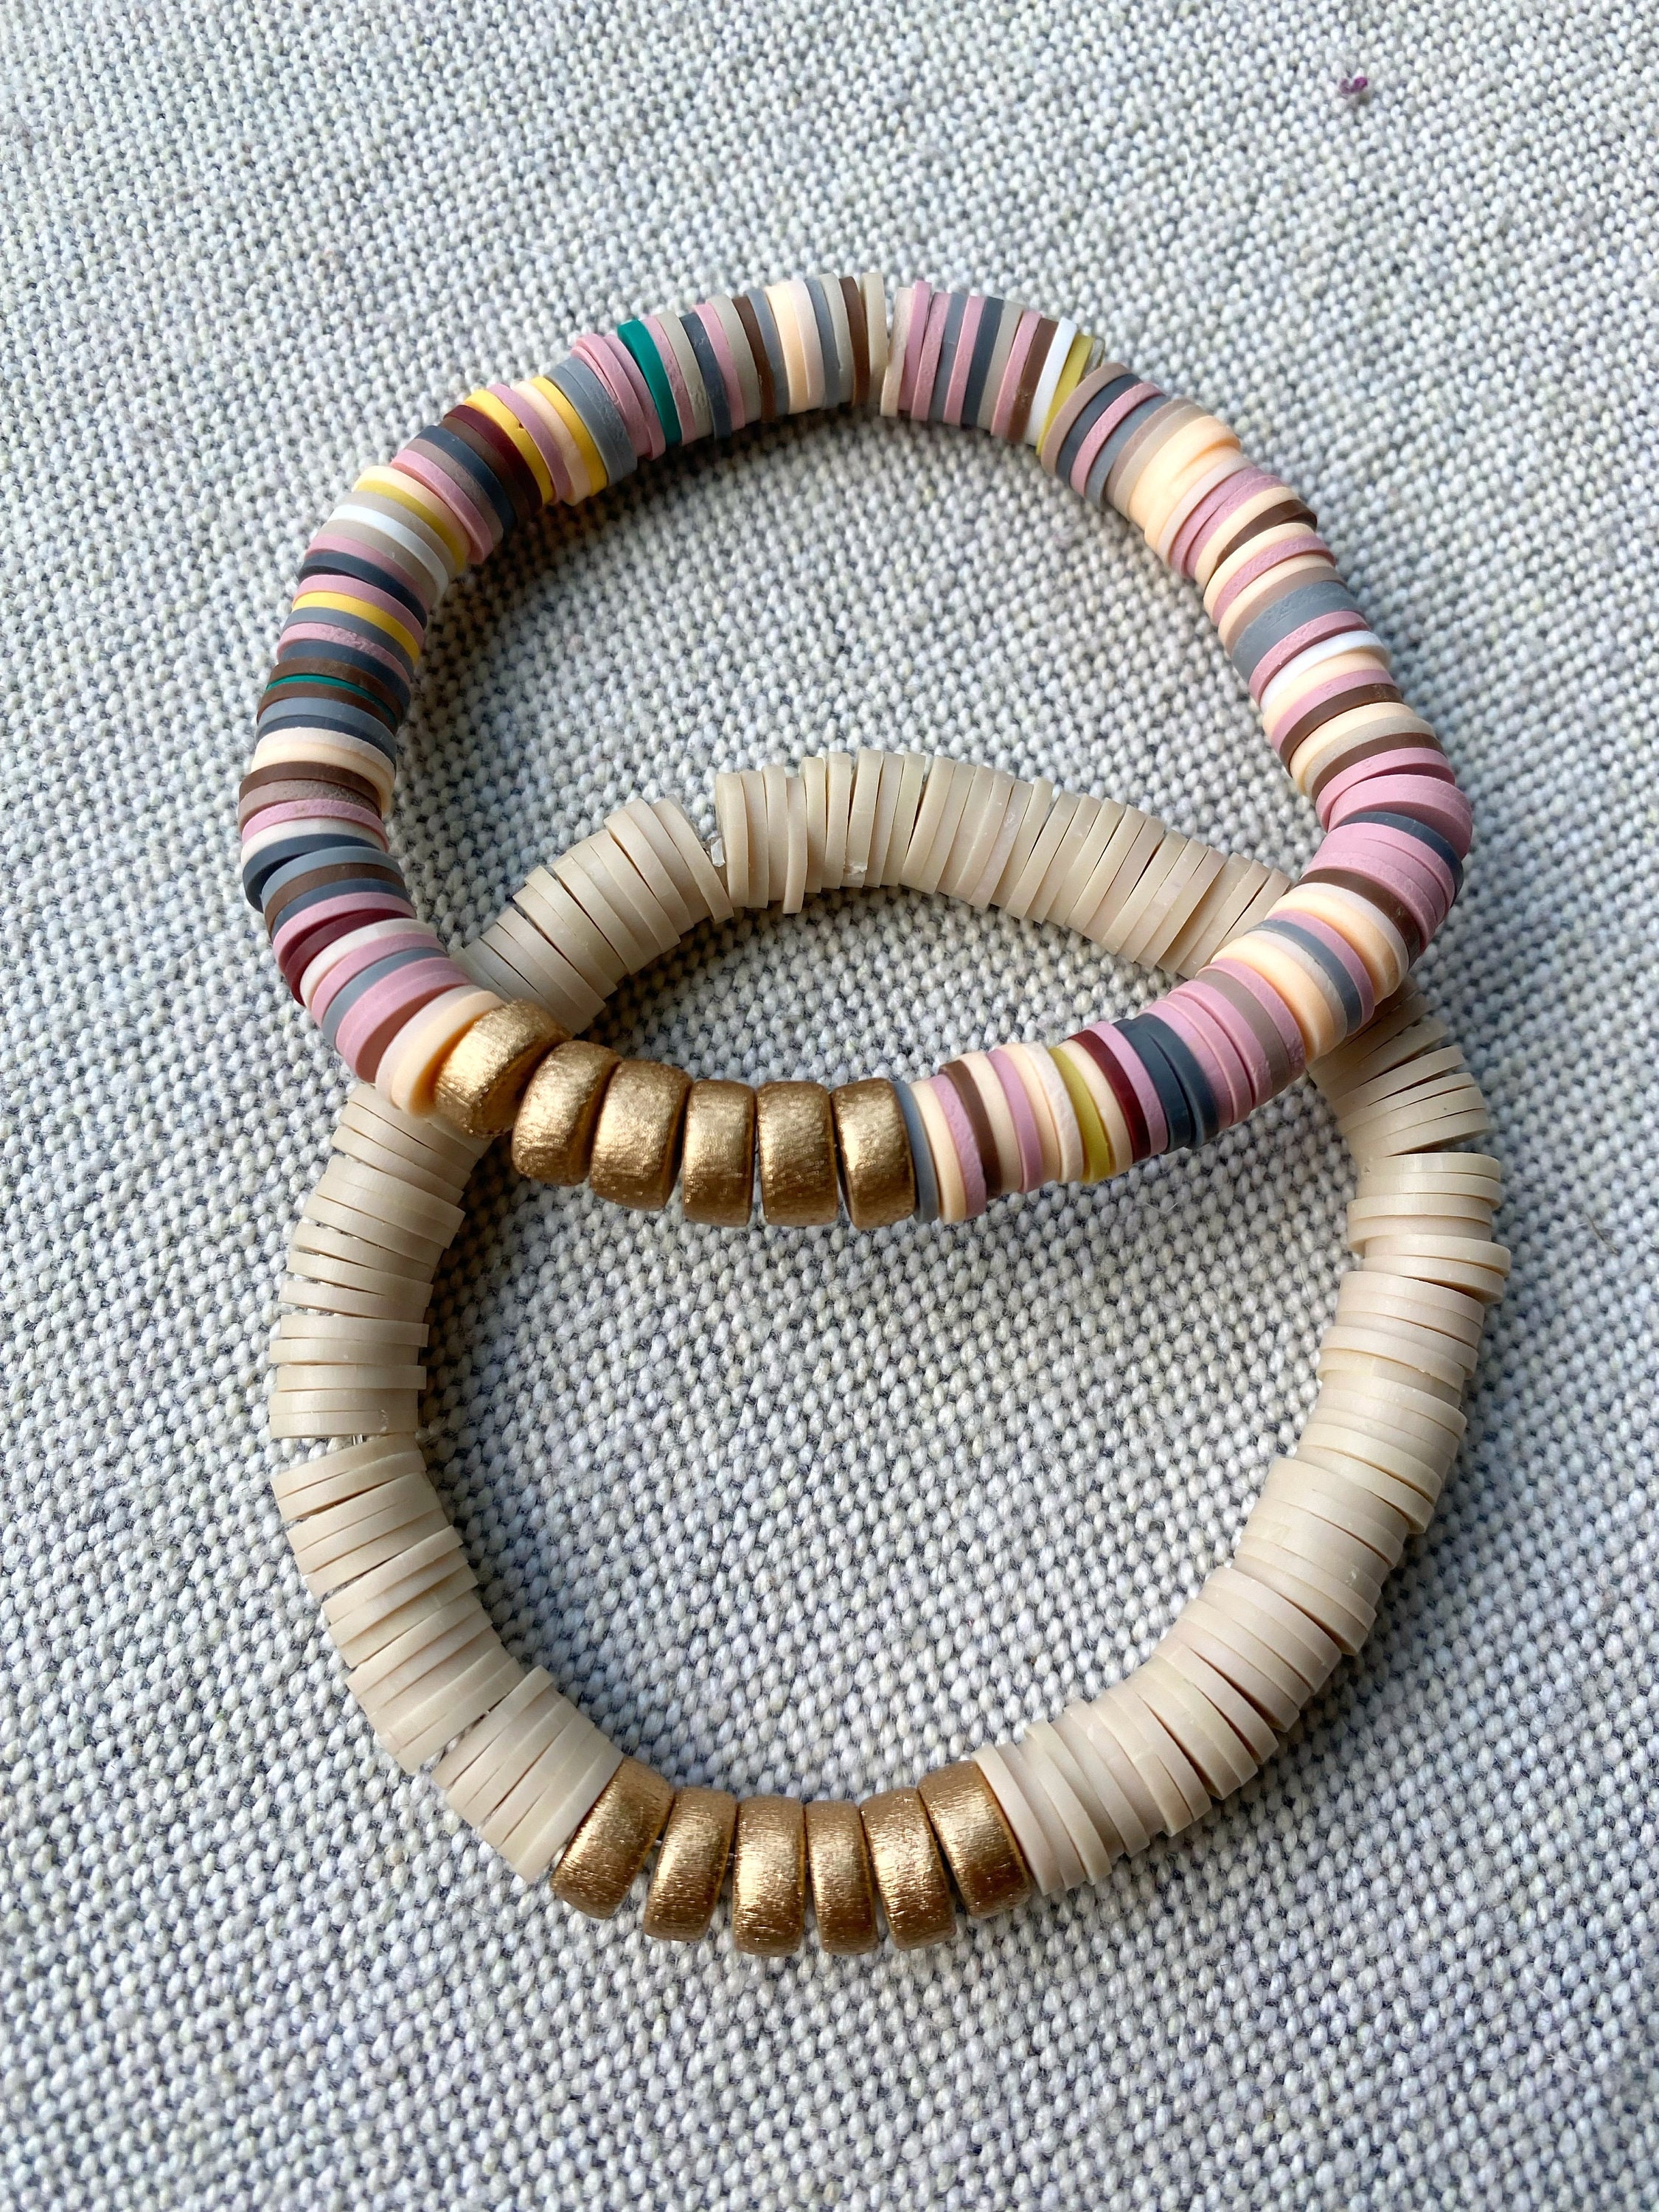 6mm Neutrals, Black, White, Brown and Tan Handmade Polymer Clay Beads, 17  Inch Strand, 6mm Beads, Disc Flat Beads 